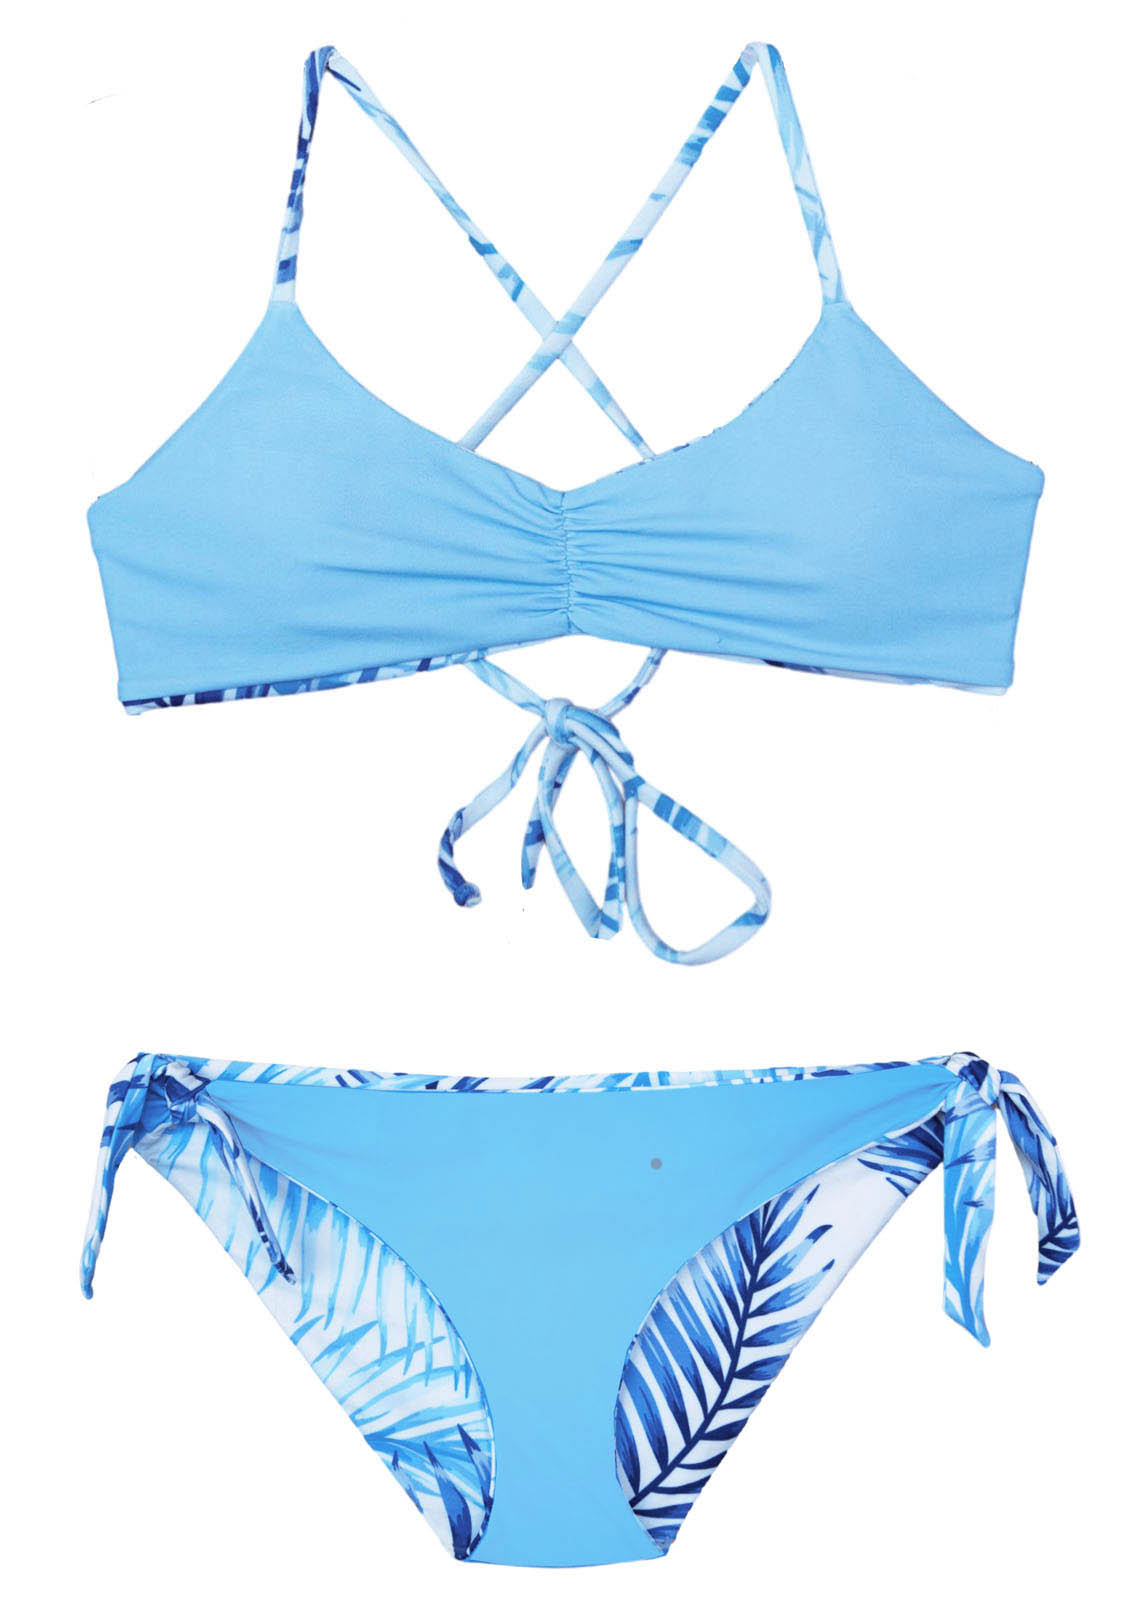 Reversible Bikini with Blue and white palm print by Chance Loves Swimwear